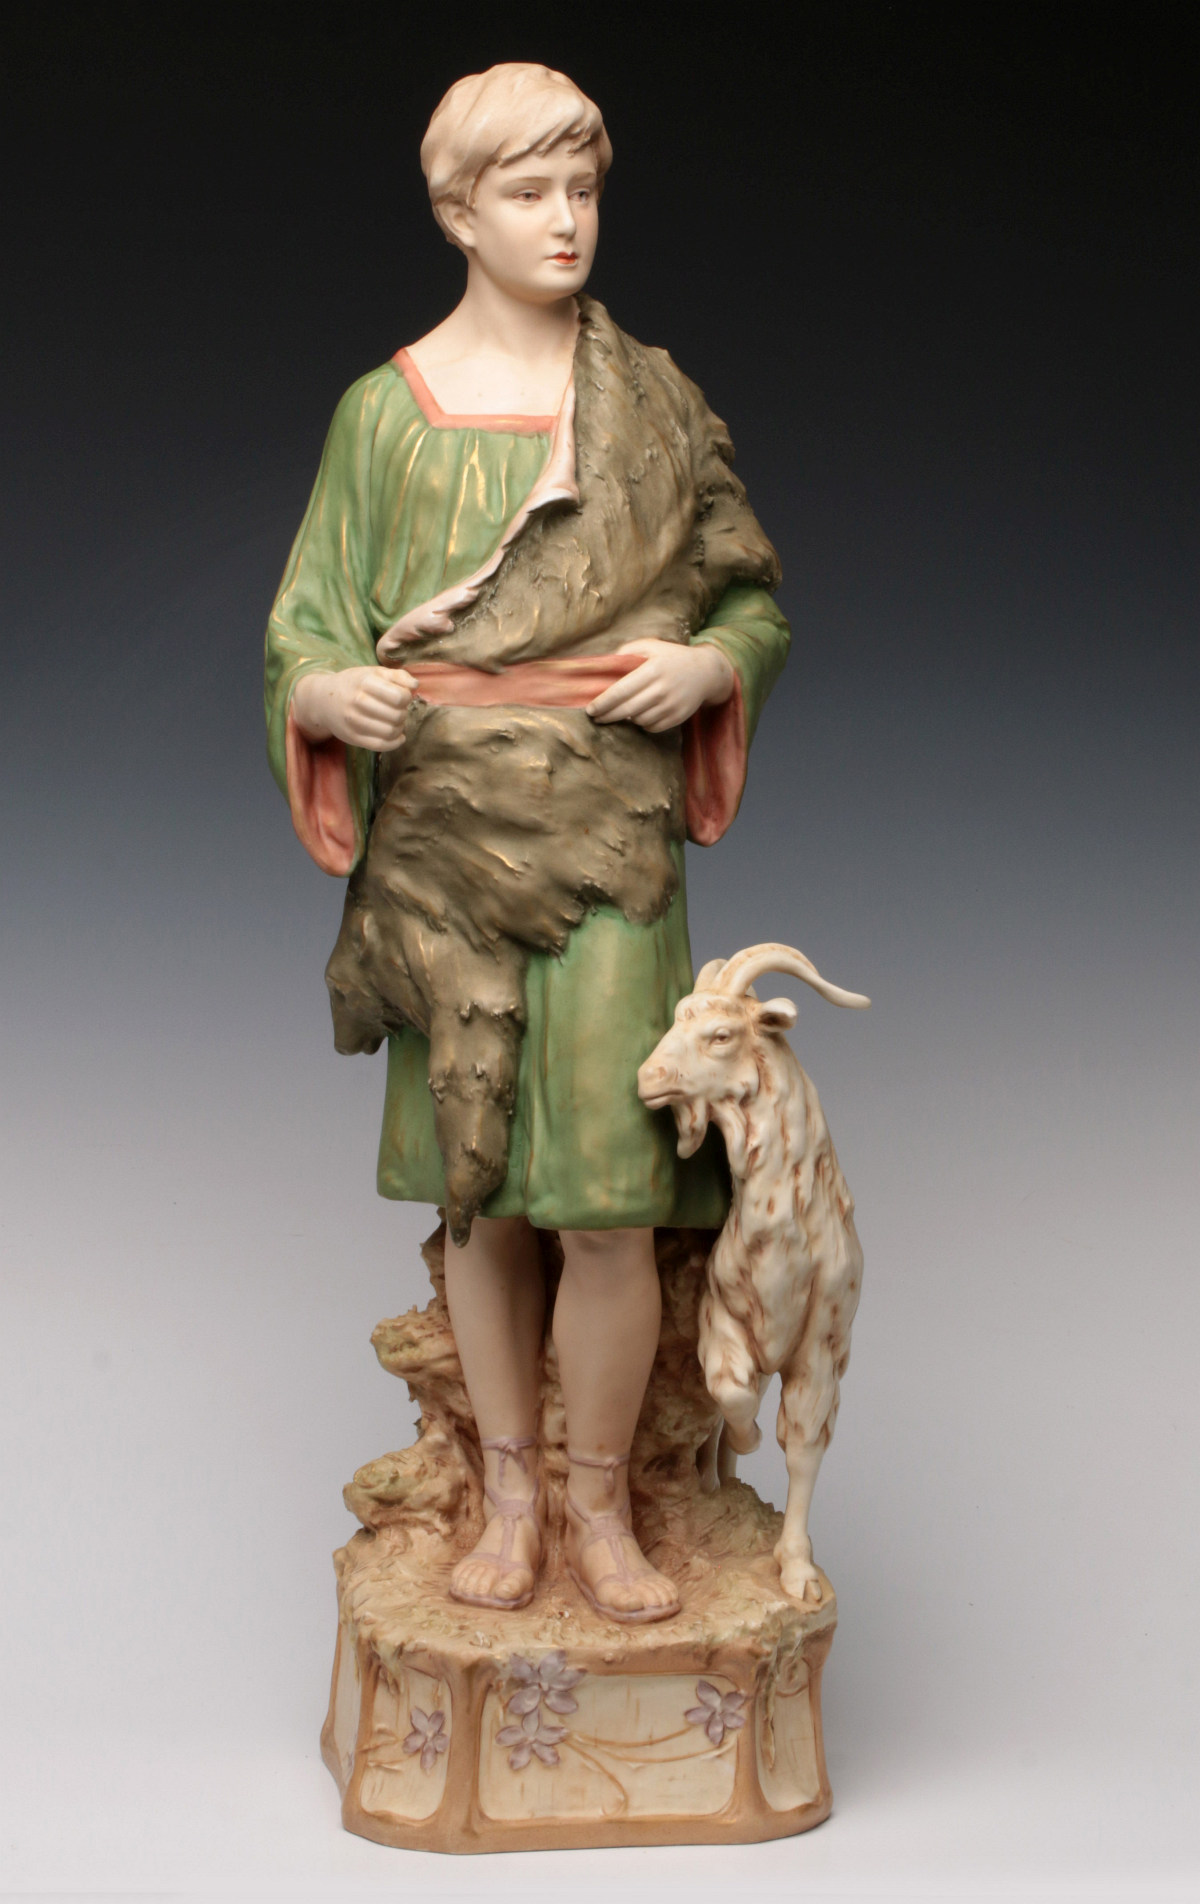 A 26-INCH ROYAL DUX CLASSICAL FIGURE OF YOUNG MAN